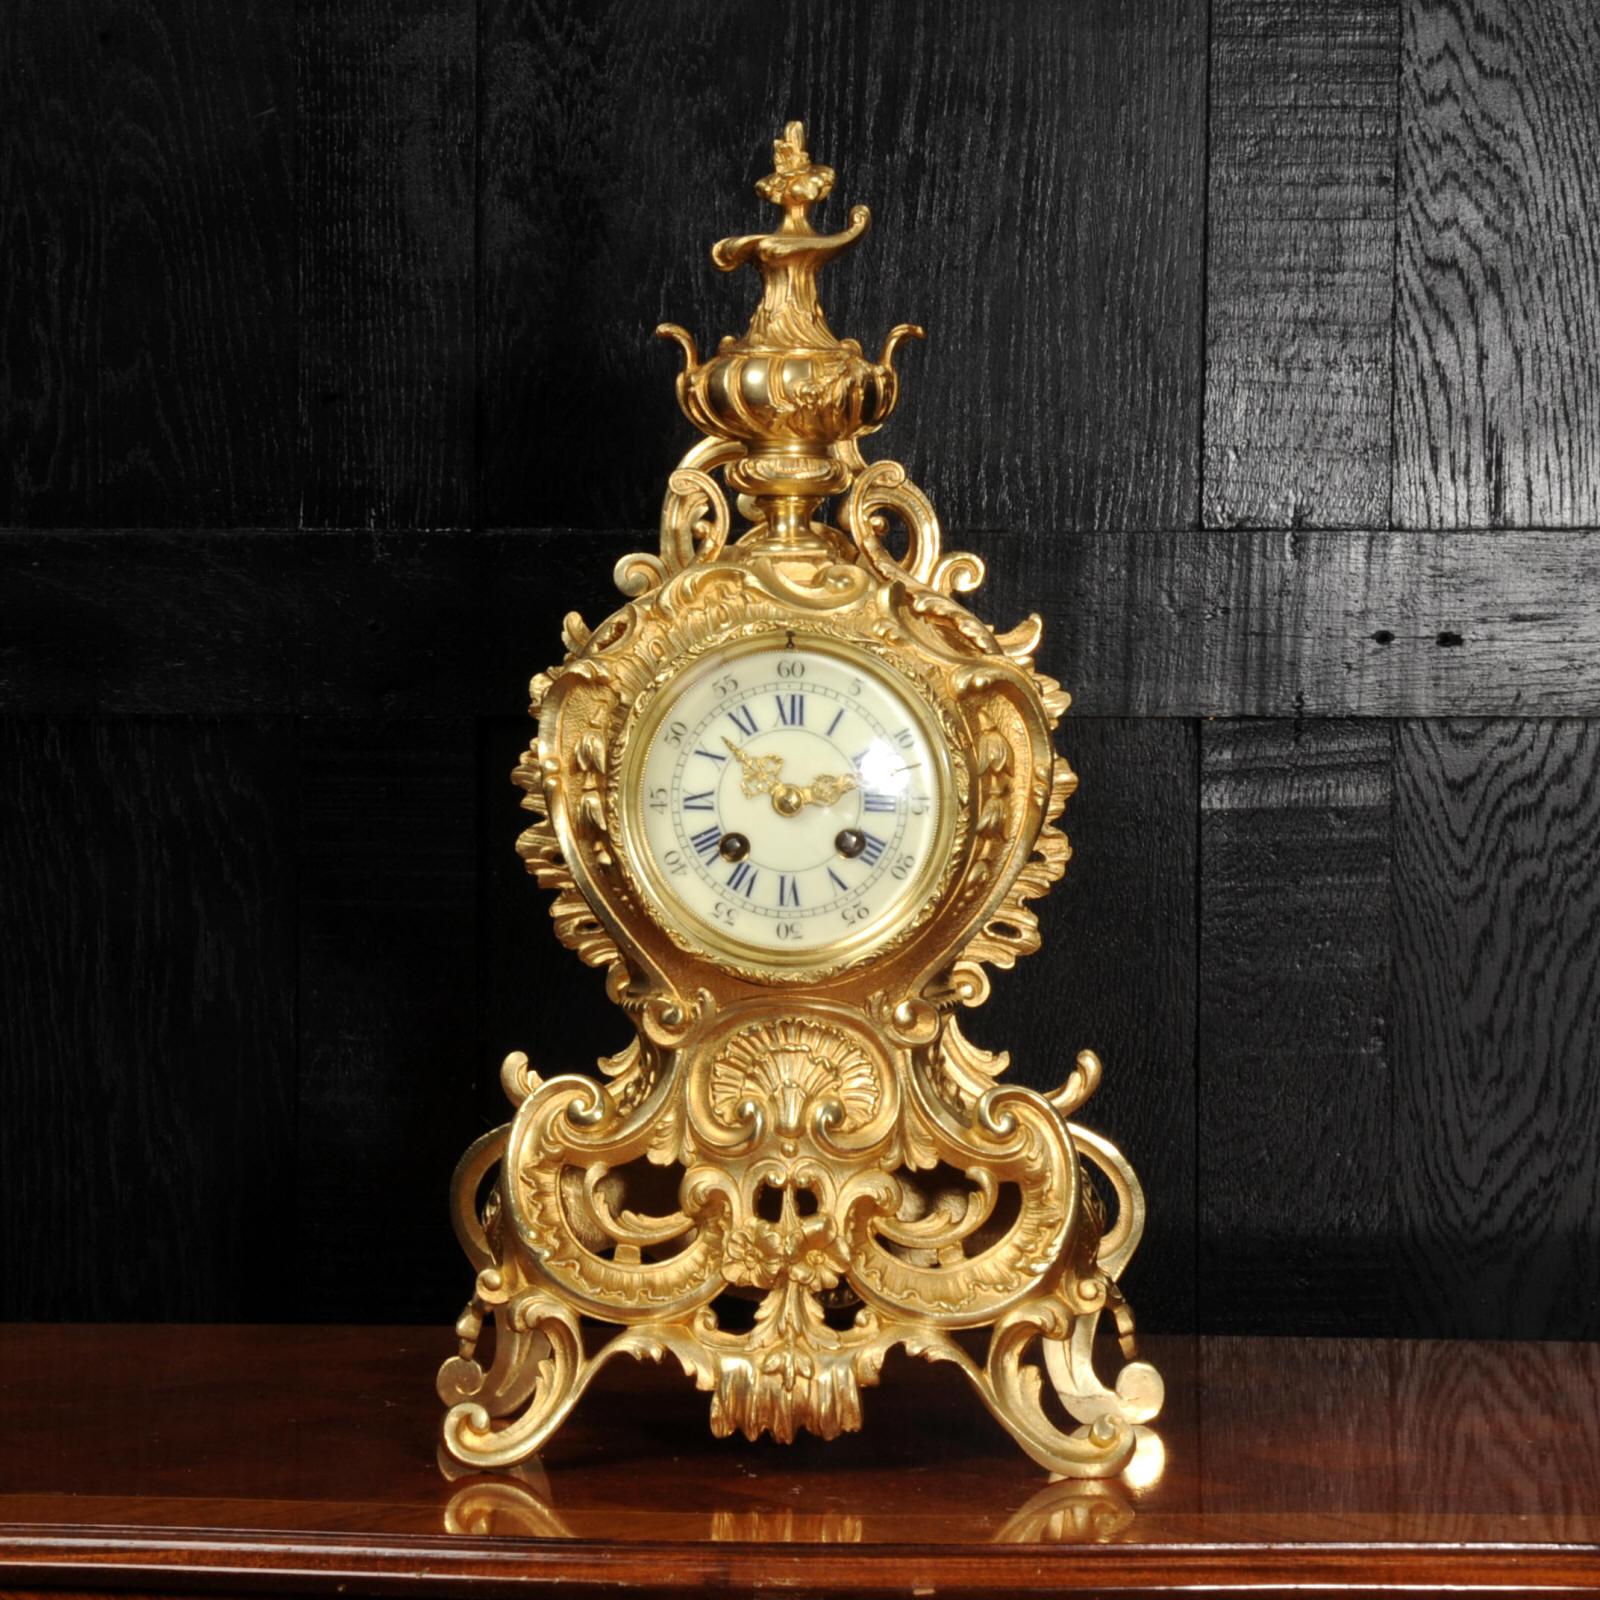 A stunning original antique French Rococo clock. It is beautifully modelled in gilded bronze, of waisted shape, profusely and boldly decorated with 'C' scrolls, acanthus leaves and trailing foliage. To the top is an elaborate urn. The front is